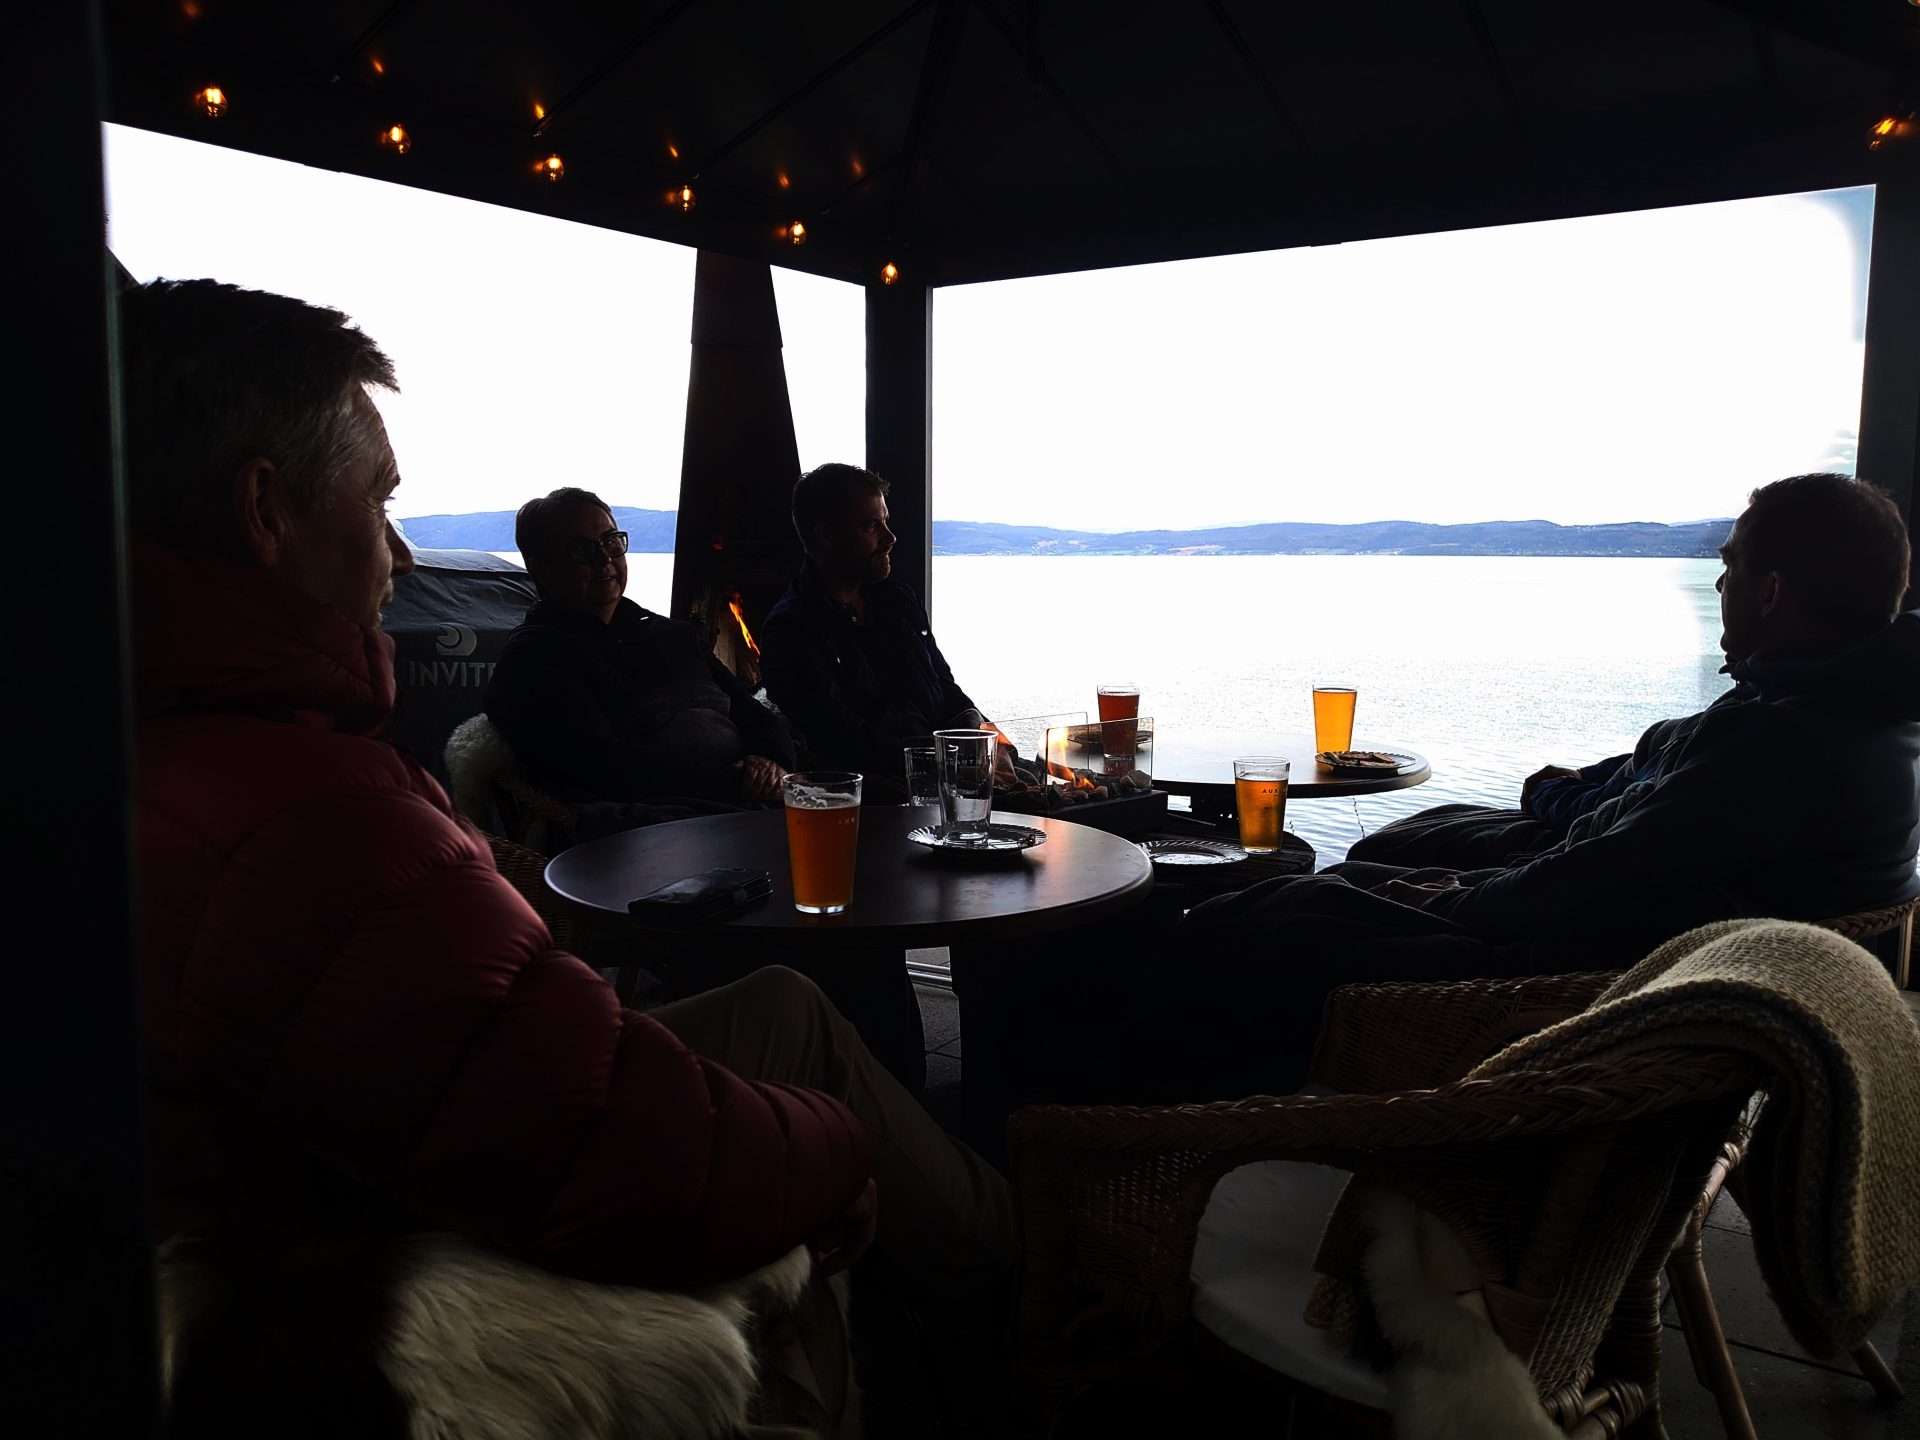 After a long and intense day of work, it's not a bad way to enjoy a good drink outdoors with a fireplace and a view of the fjord.